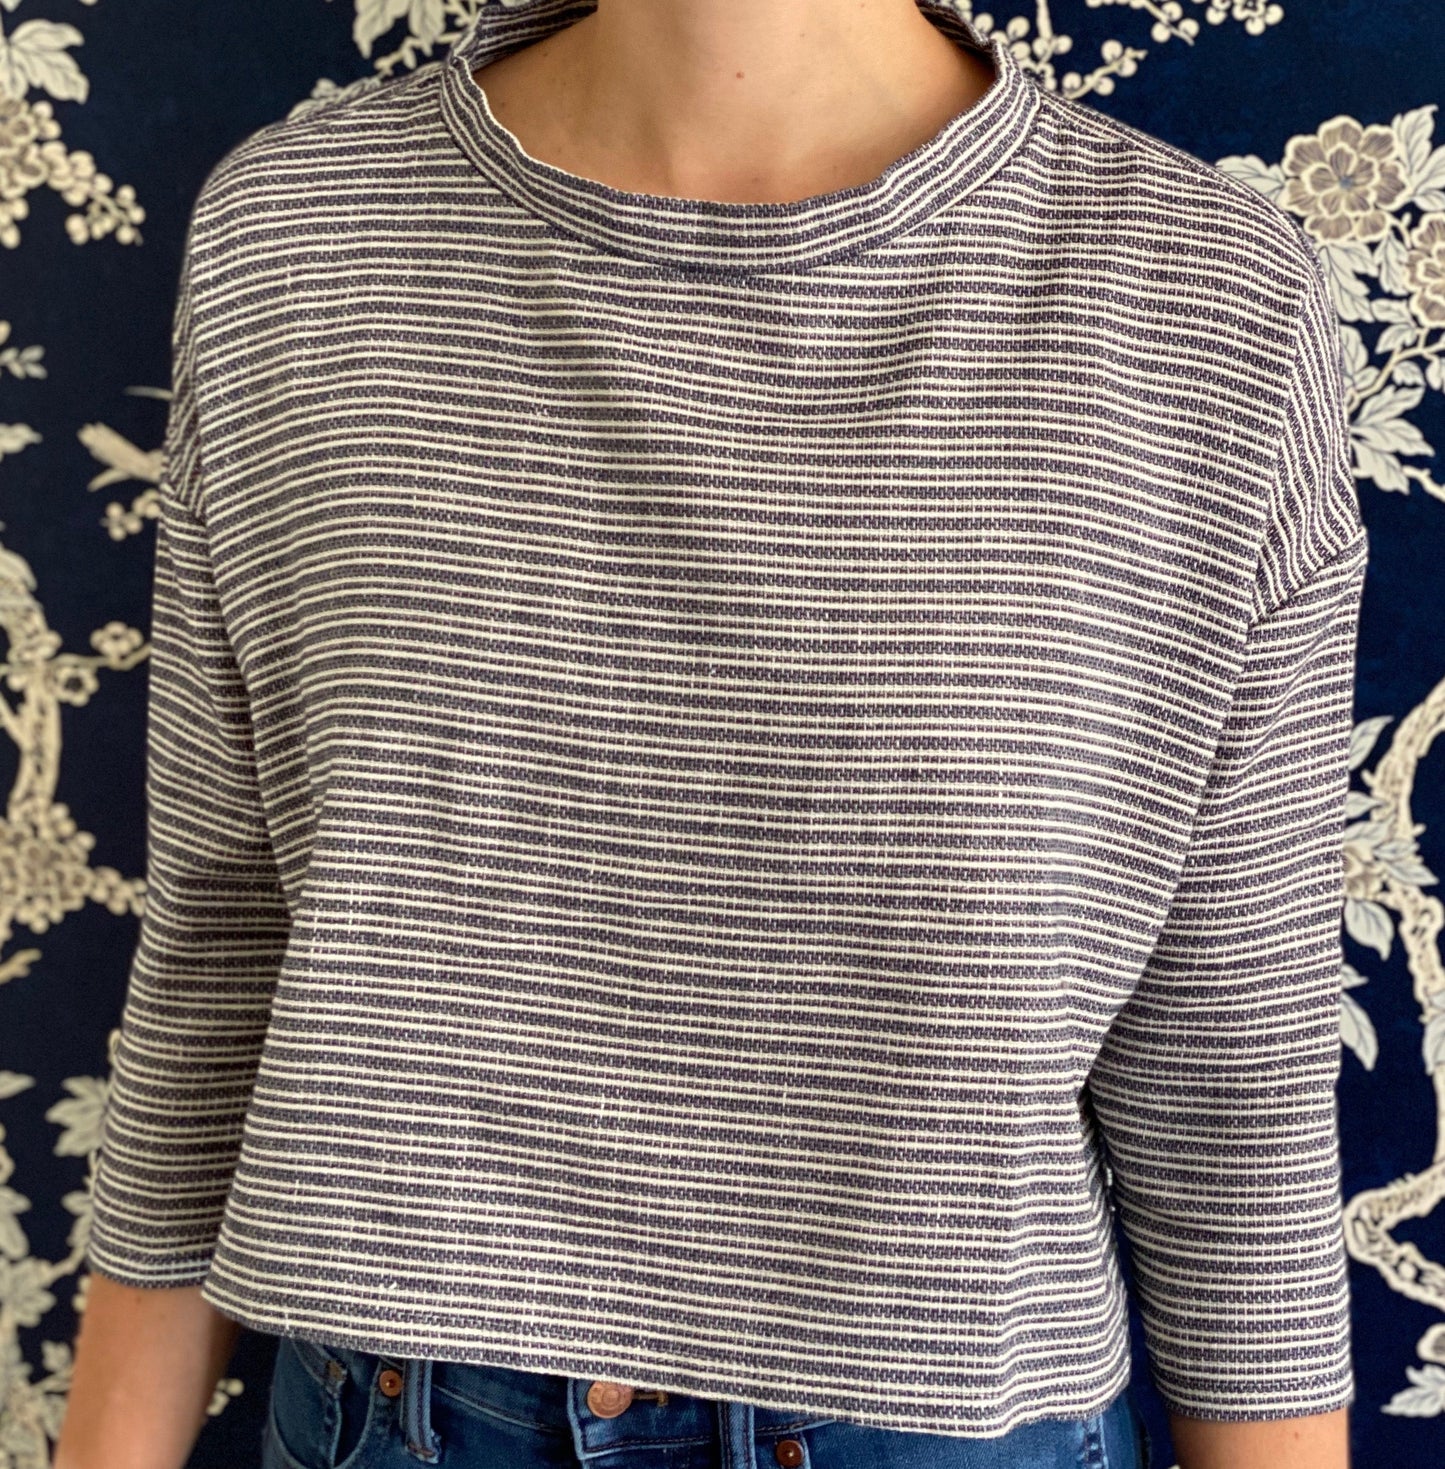 Clemmie Top in Striped Tweed - CCH Collection